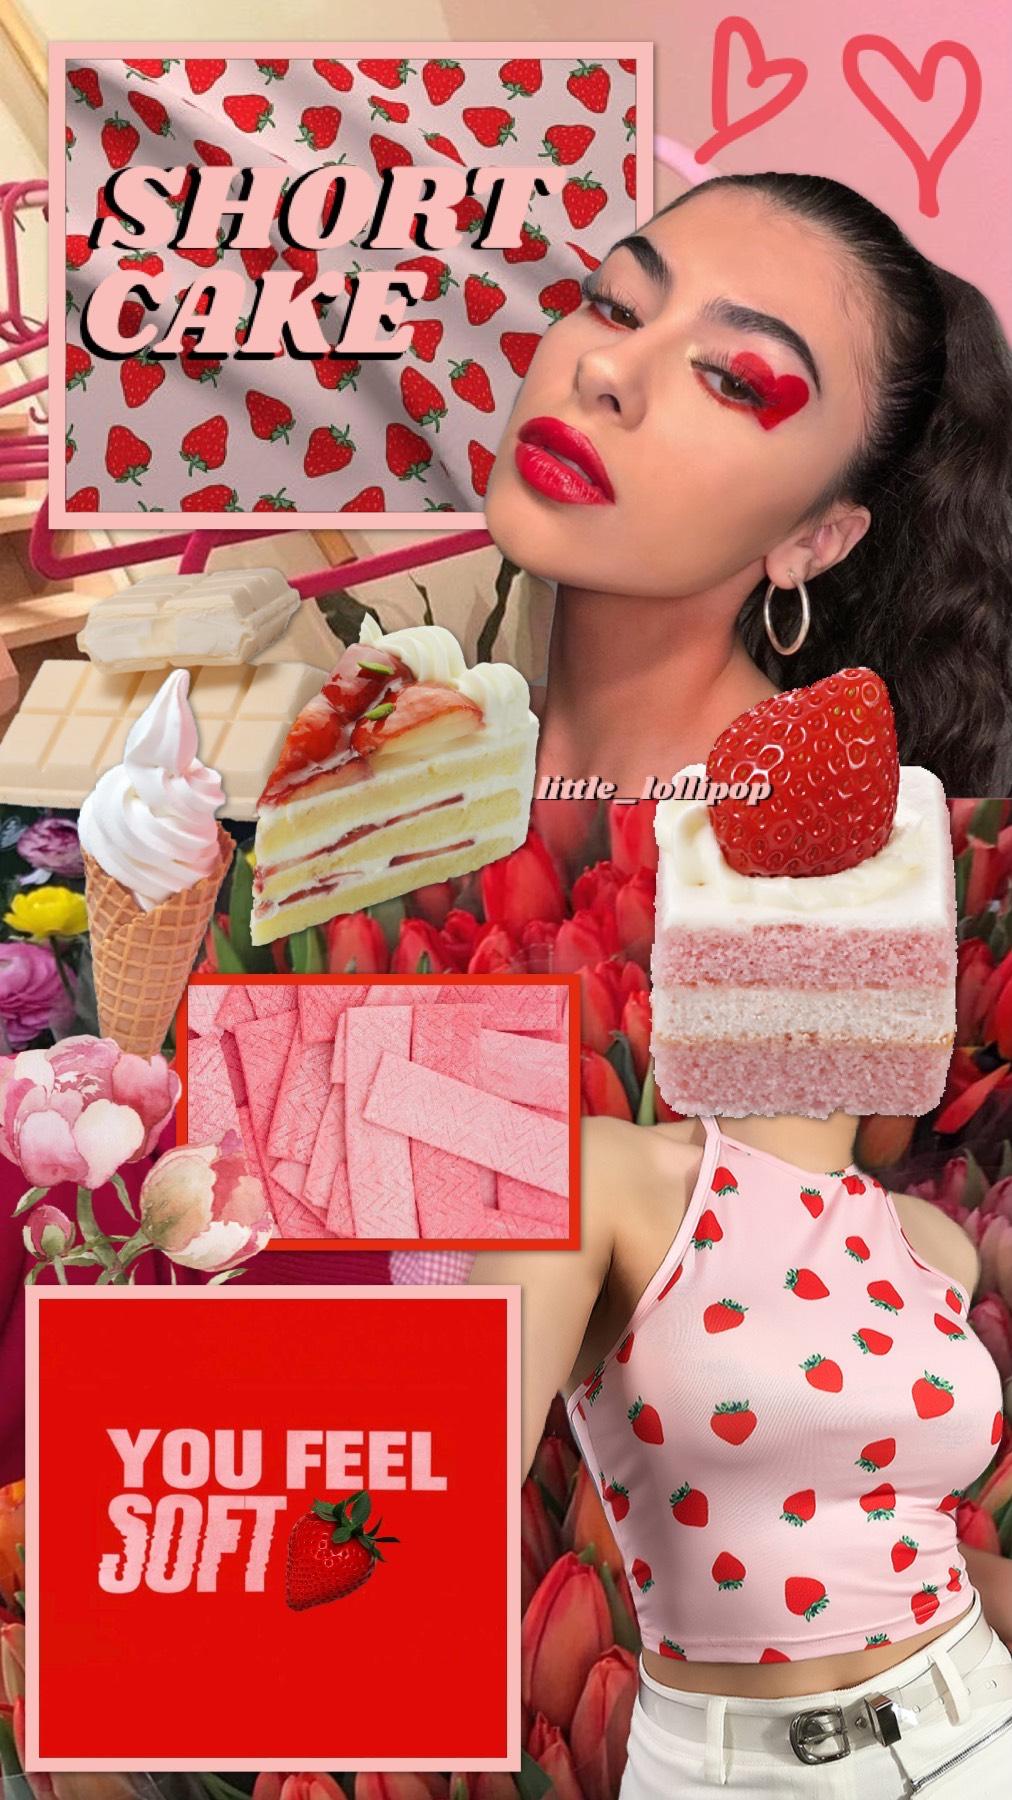 i started making this while taking my nail polish off, so part of this collage was made with only one hand💅🏻 anywho enjoy this collage inspired by my brand new pyjama shorts!🌸🍓